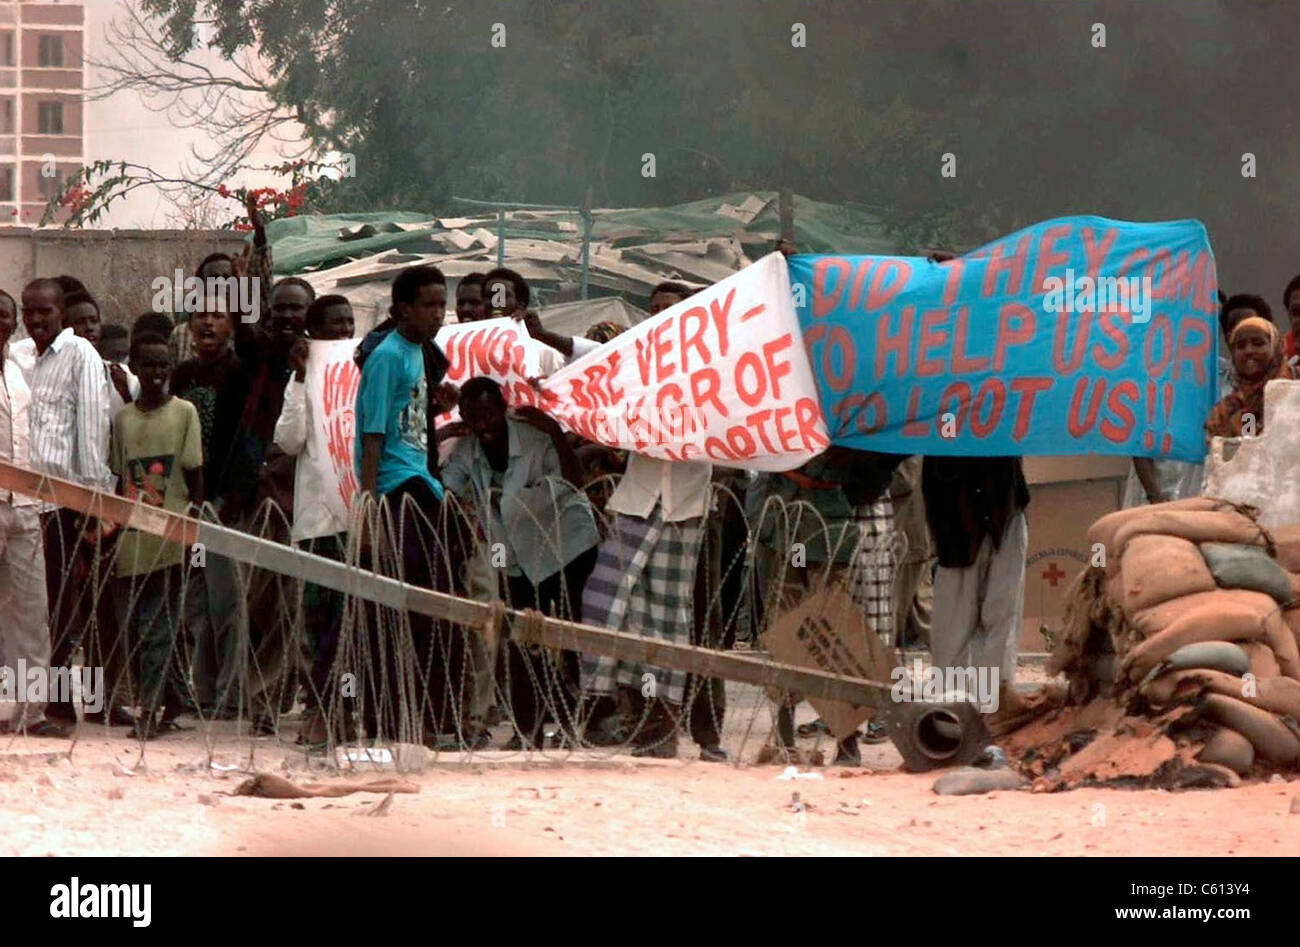 Somali civilians protest the presence of U.N. mostly U.S. forces in Mogadishu at the U.S. Embassy in Somalia. Their banner reads 'Did they come to help us or loot us ' Feb. 1 1993. (BSLOC 2011 3 31) Stock Photo